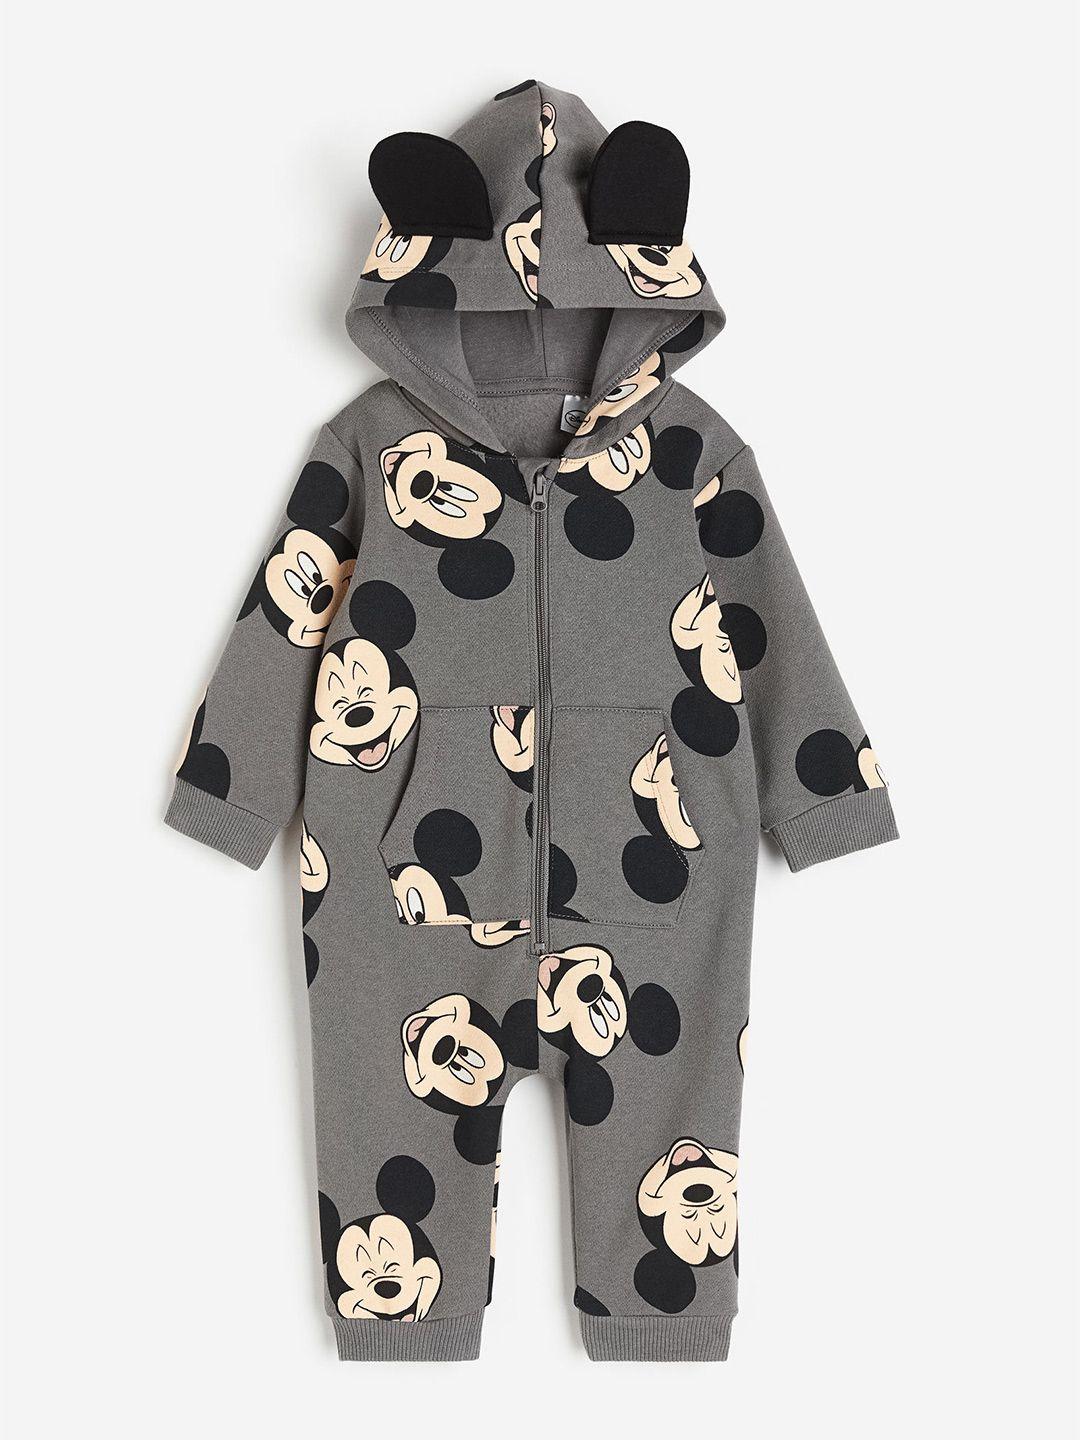 h&m infant boys printed sweatshirt all-in-one suit